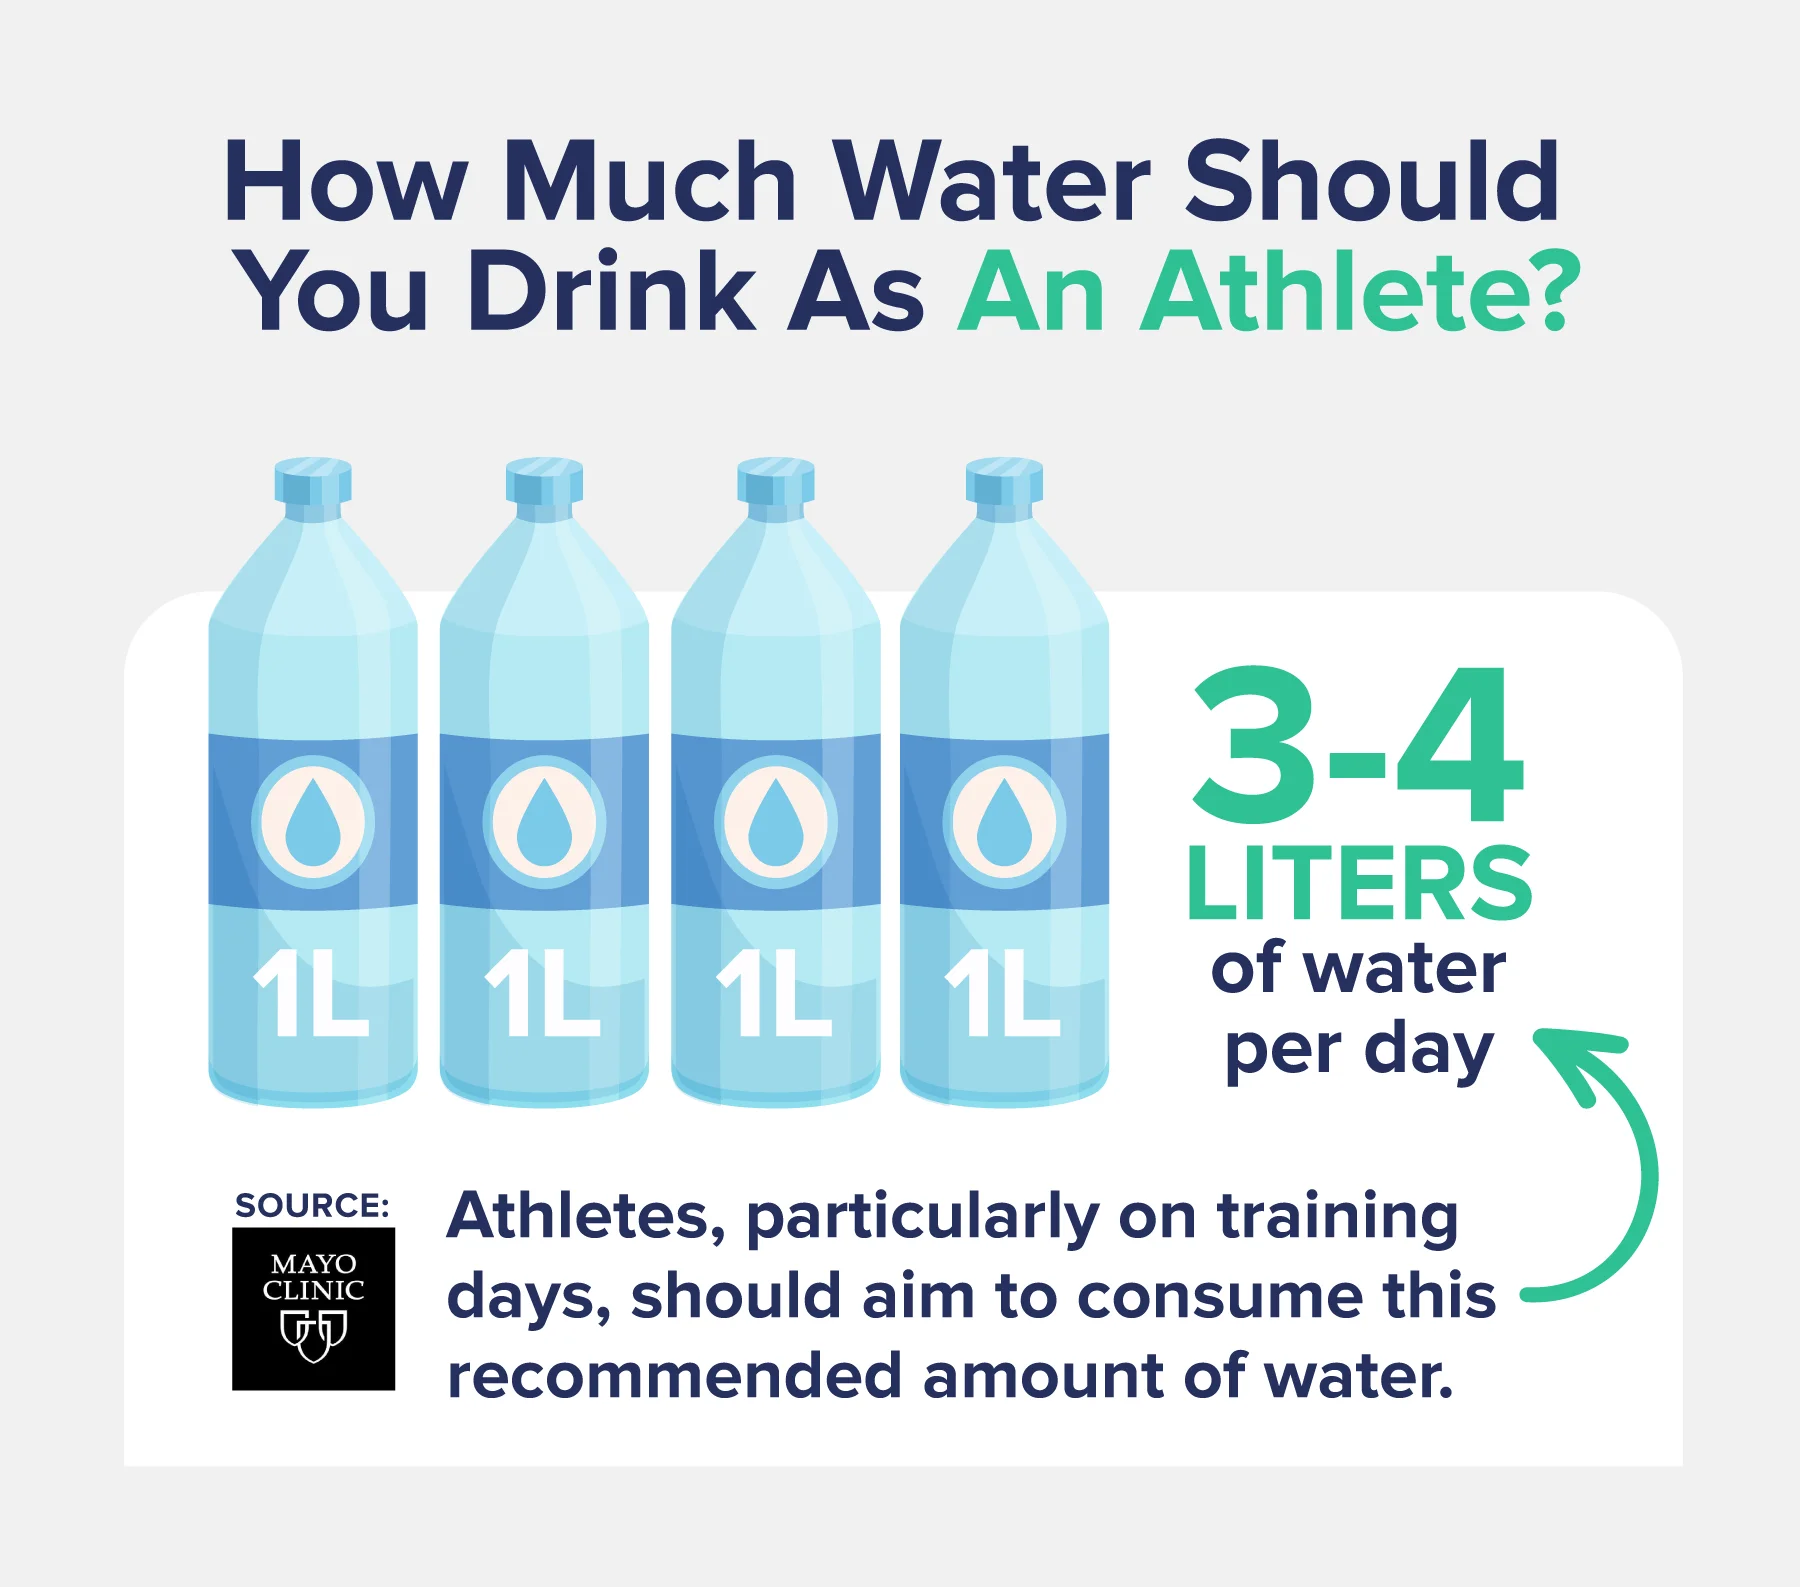 How much water should you drink as an athlete?